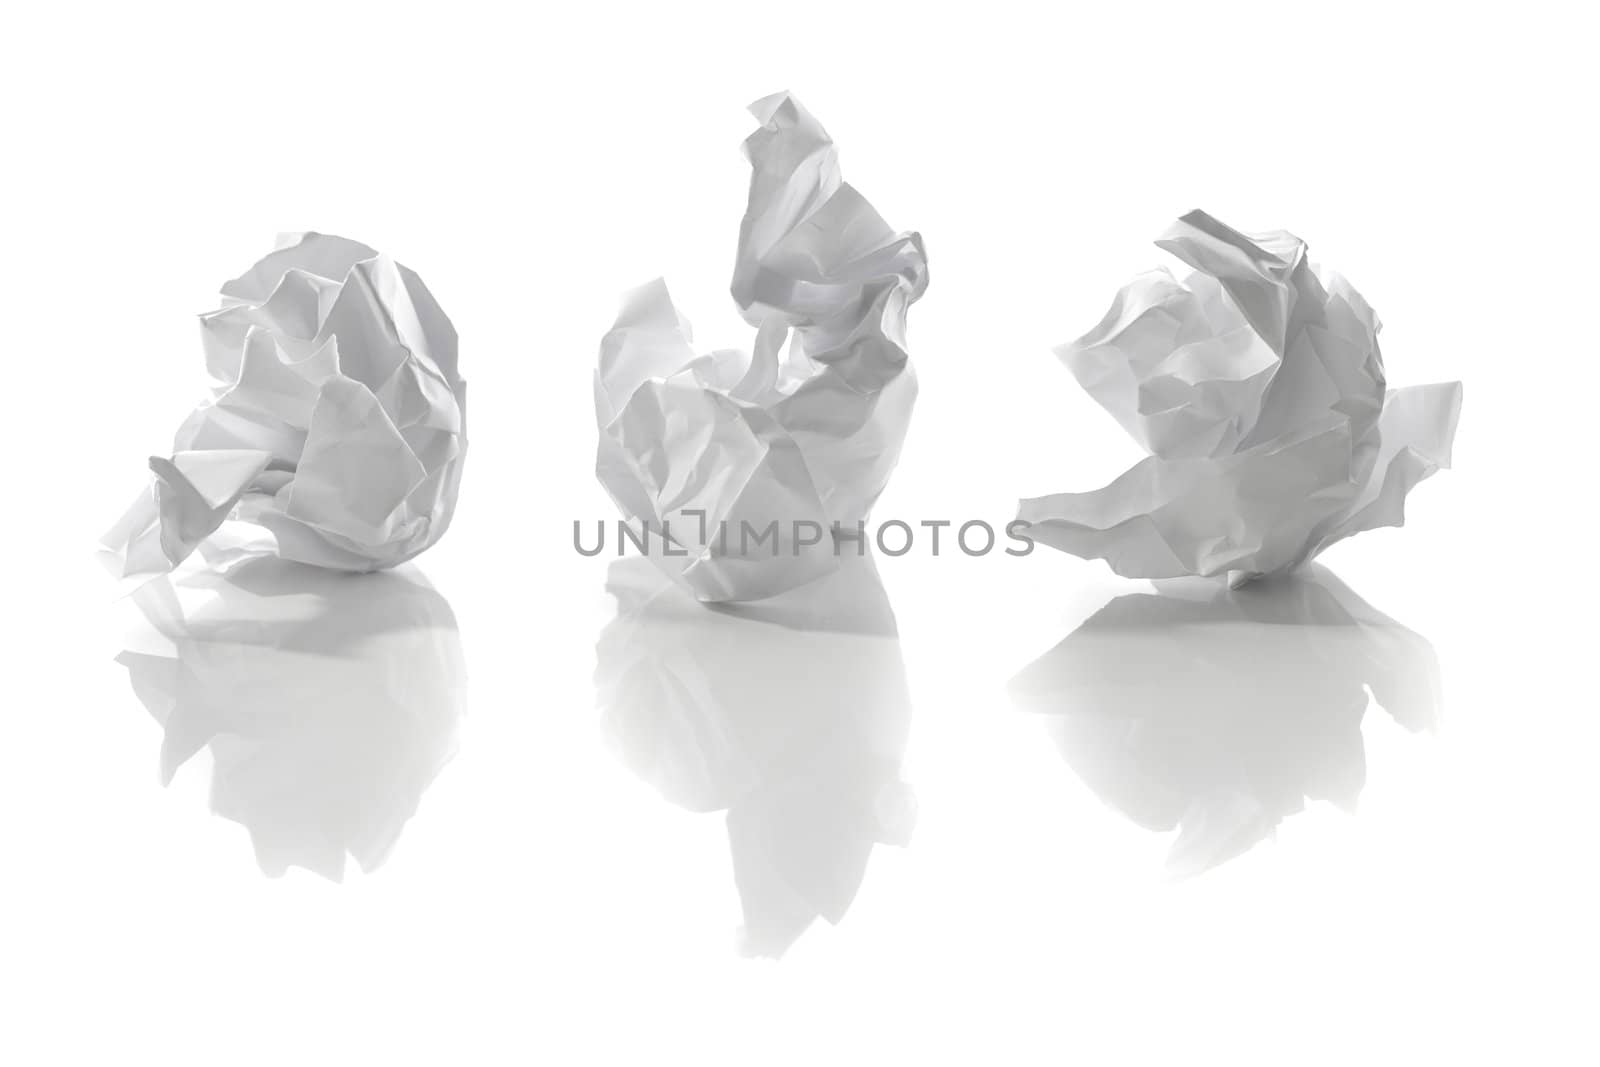 Crumpled white papers with reflections